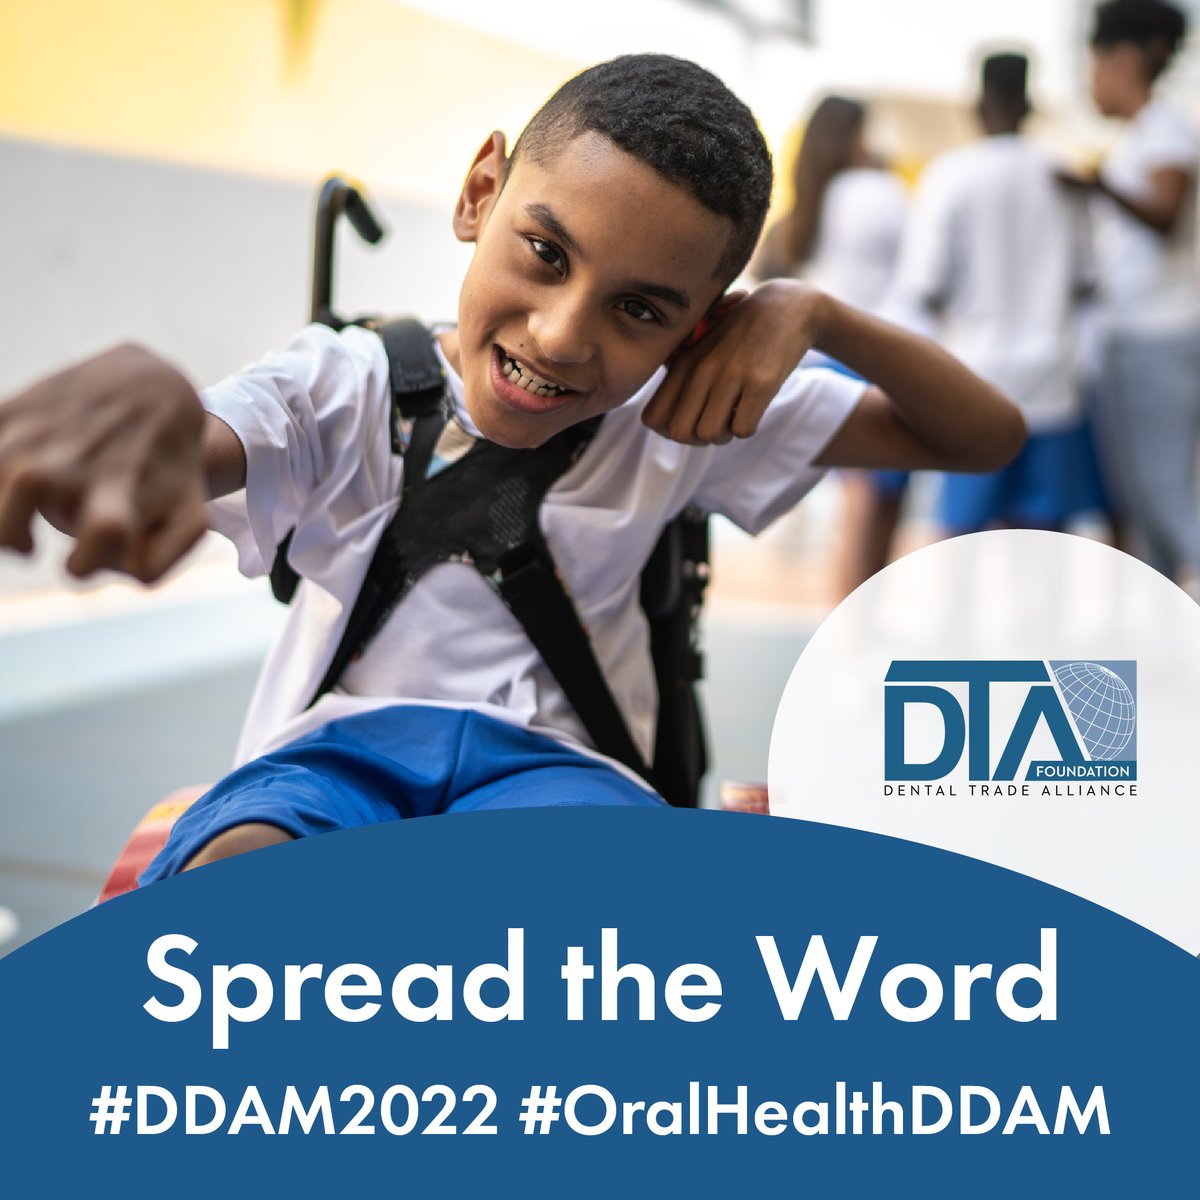 Kids with disabilities are 30% more likely to have their first dental visit delayed. We're dedicated to increasing #AccessibleDentistry. Help support us and #DDAM2022 by sharing and spreading the word! #disabilityawareness #oralhealth #OralHealthDDAM